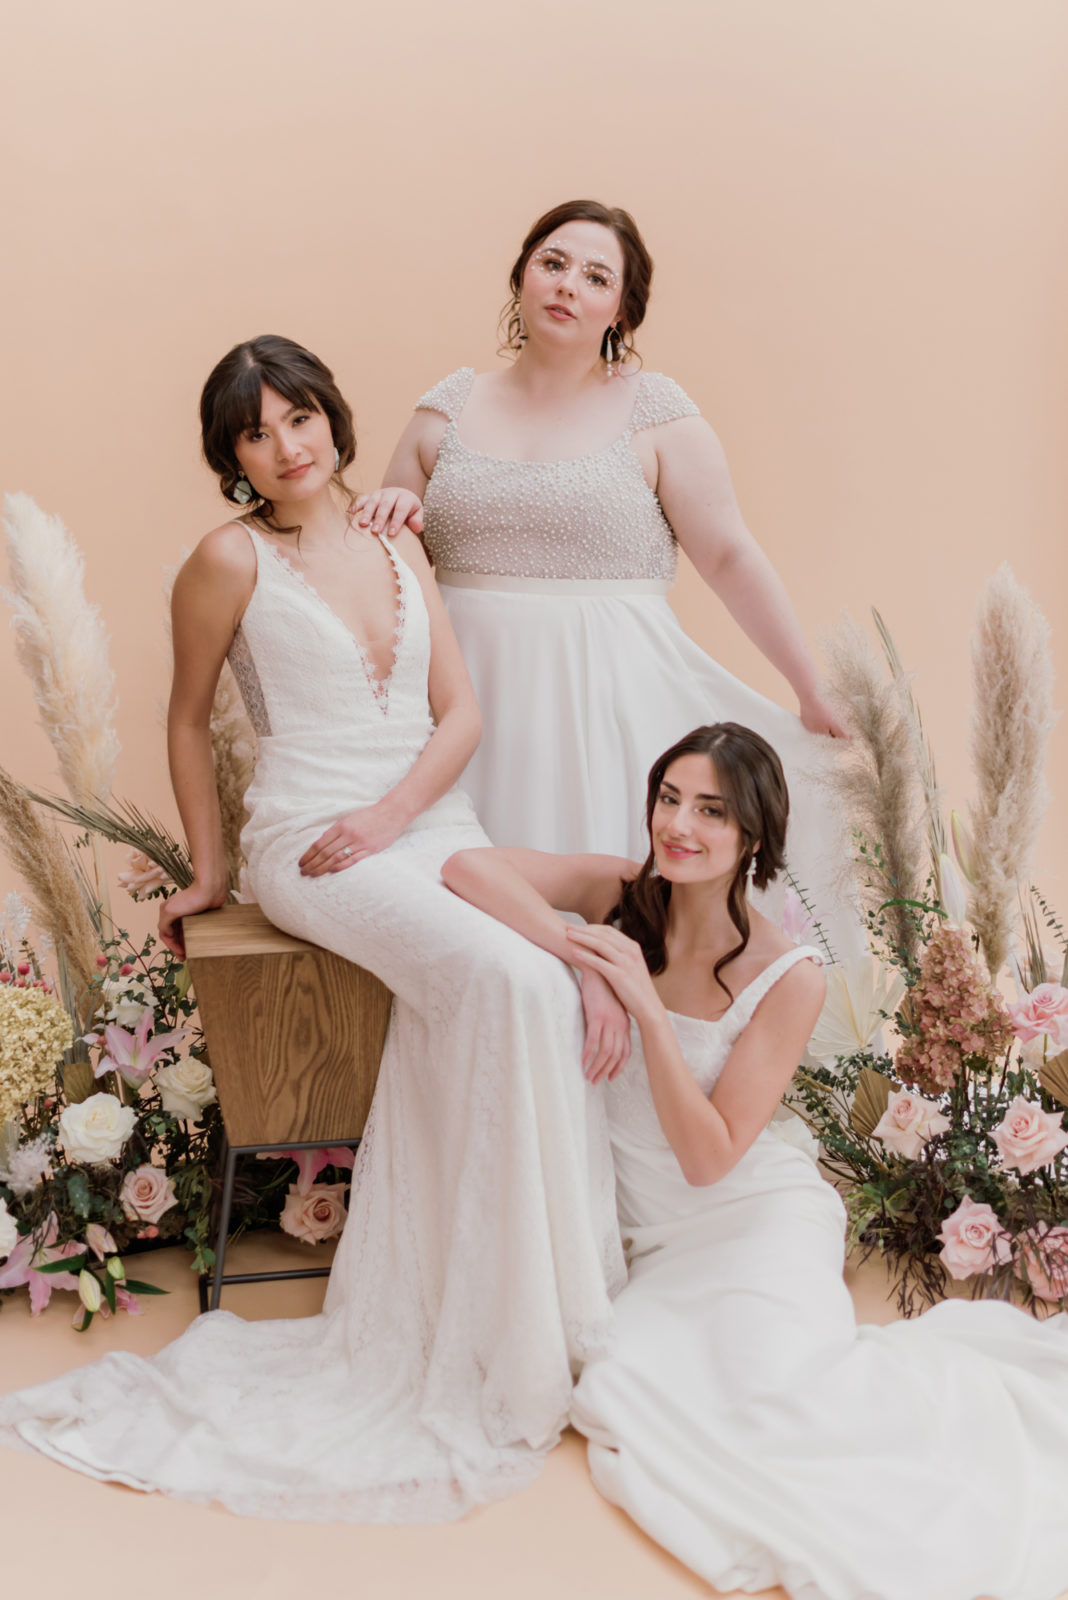 Three models showcase a new collection of wedding gowns a Lovenote Bride in Calgary Alberta